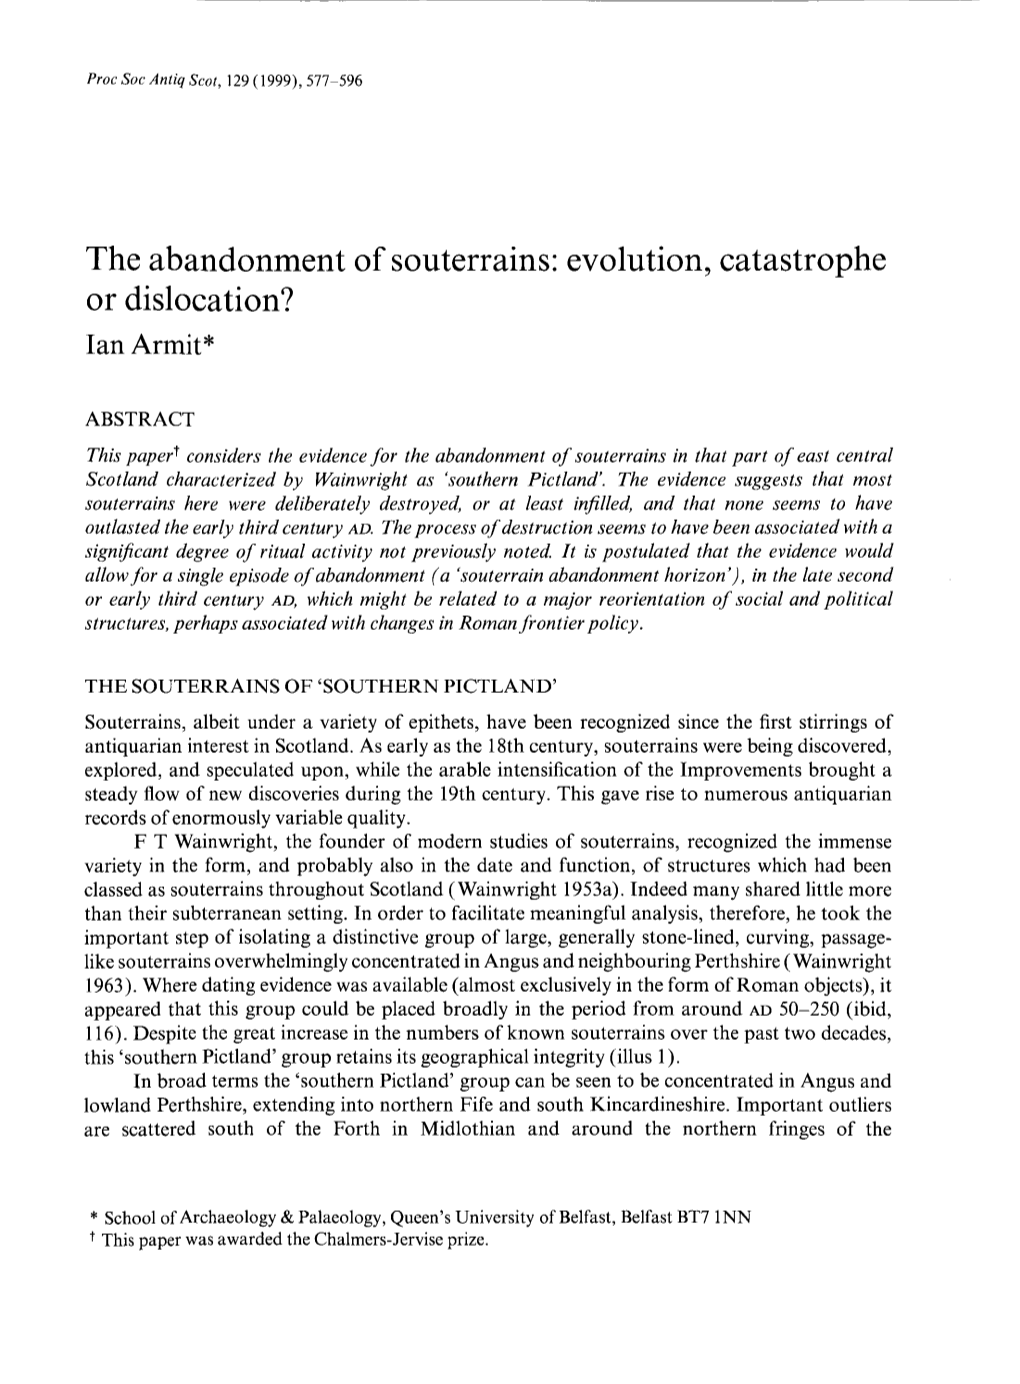 The Abandonment of Souterrains: Evolution, Catastrophe Or Dislocation?